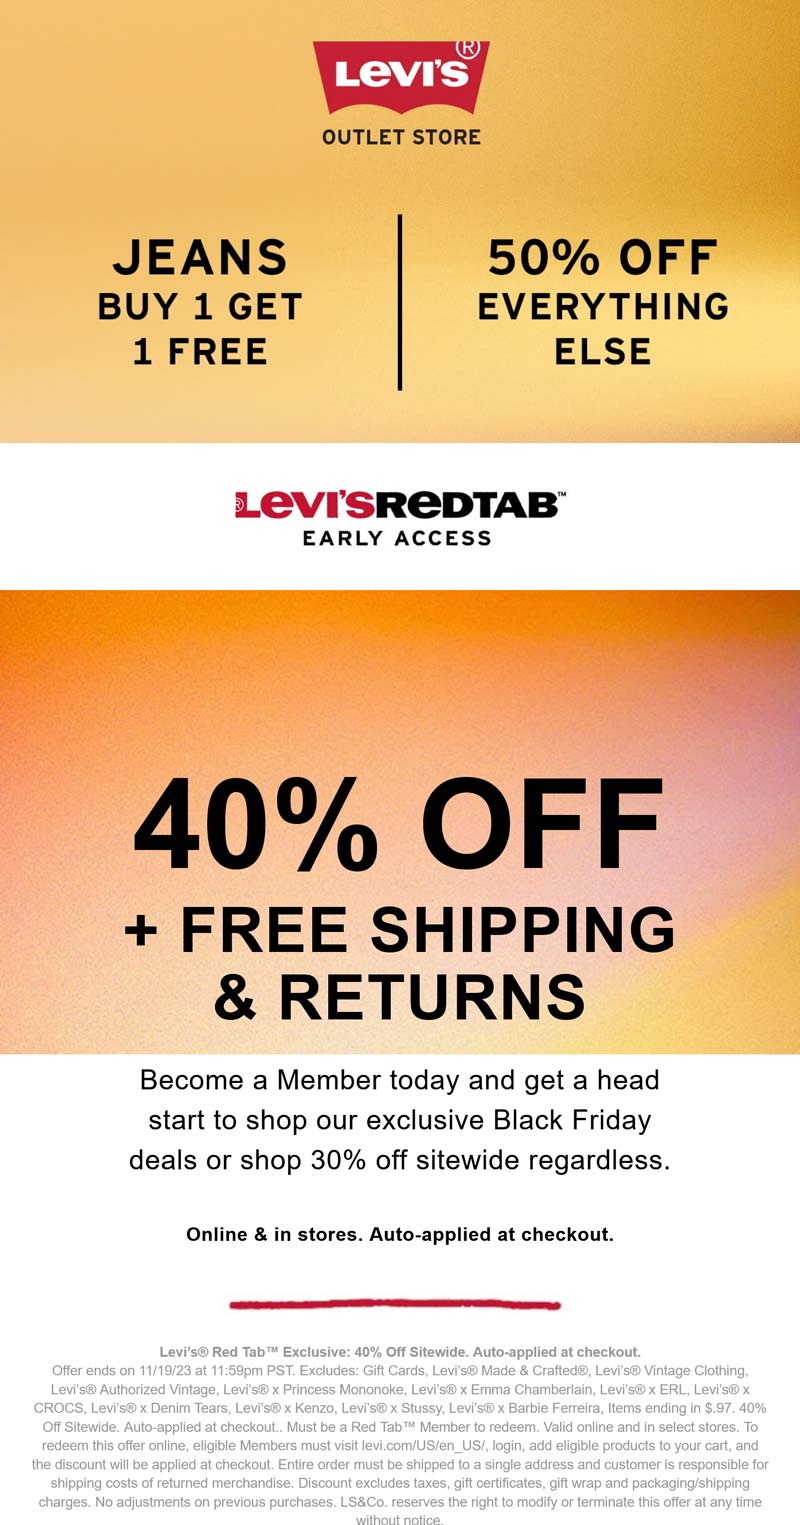 Levis Outlet Store stores Coupon  Second jeans free & 50% off everything at Levis Outlet Store #levisoutletstore 